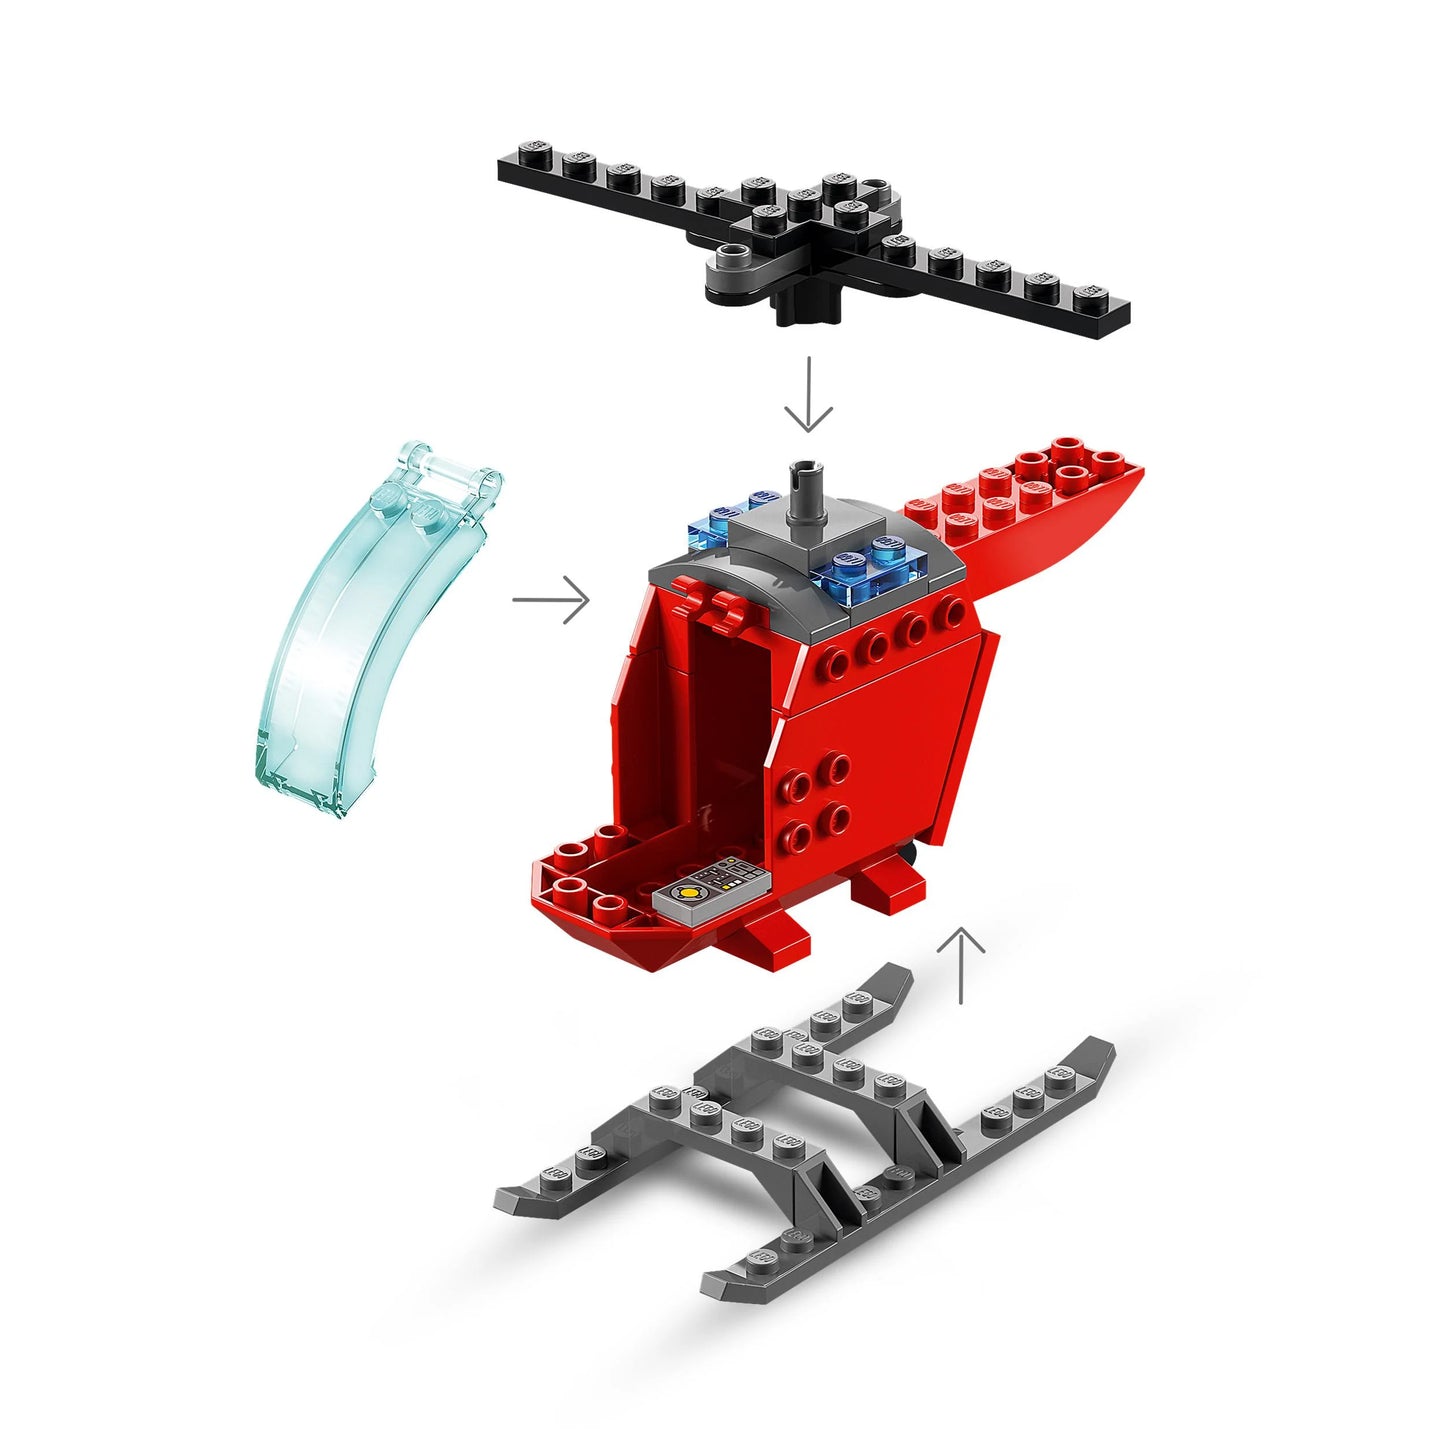 Fire Helicopter-LEGO City